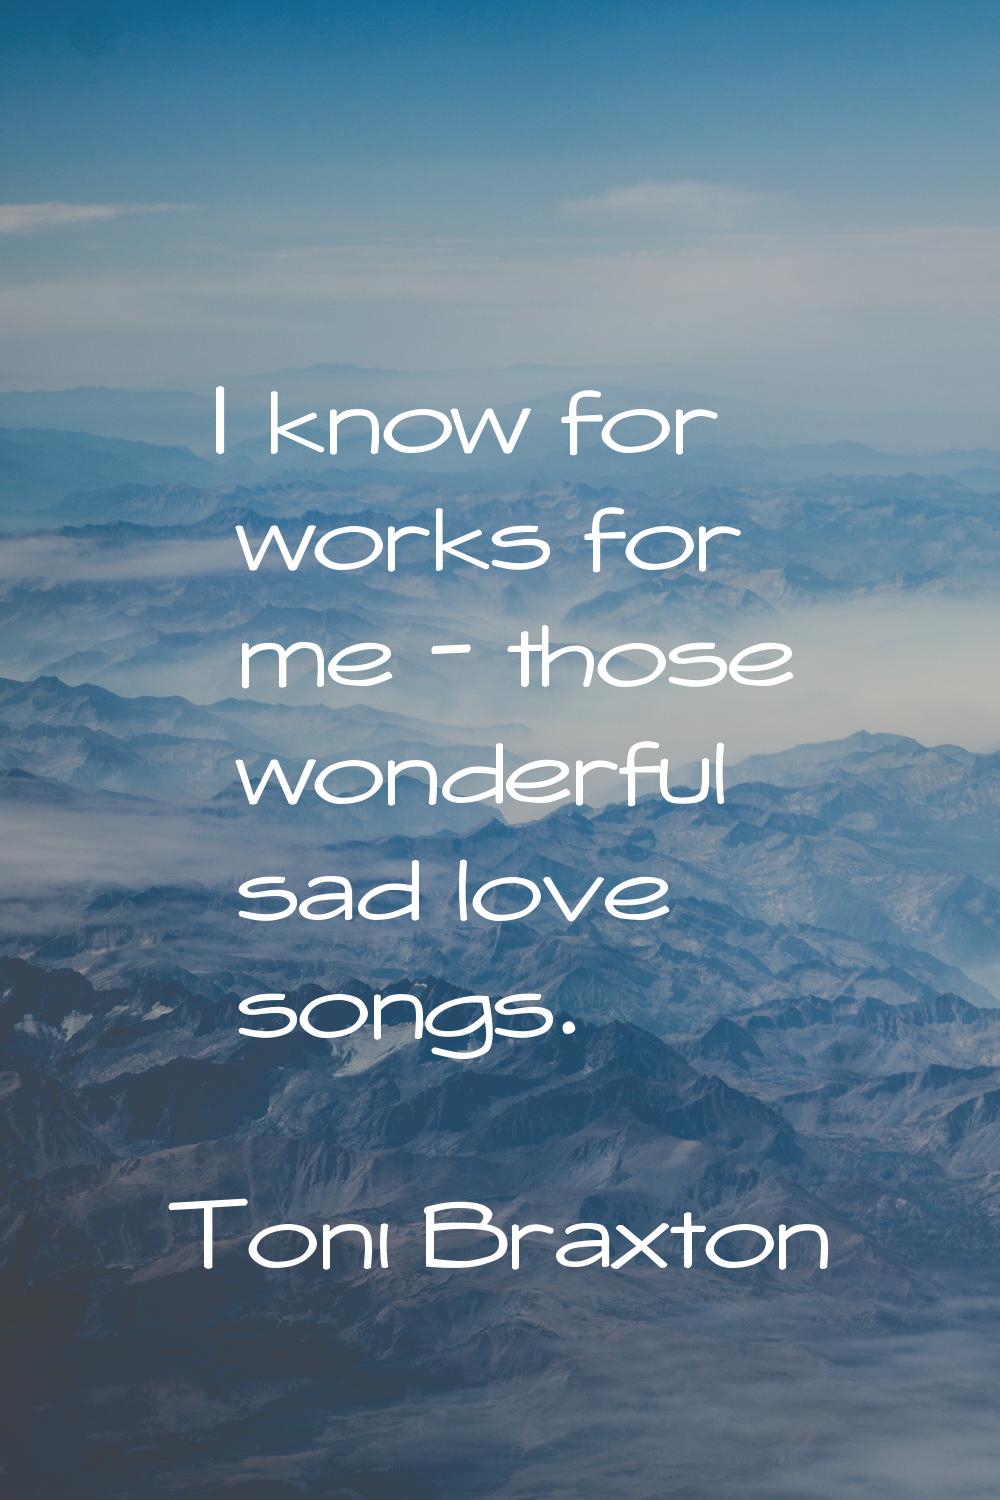 I know for works for me - those wonderful sad love songs.